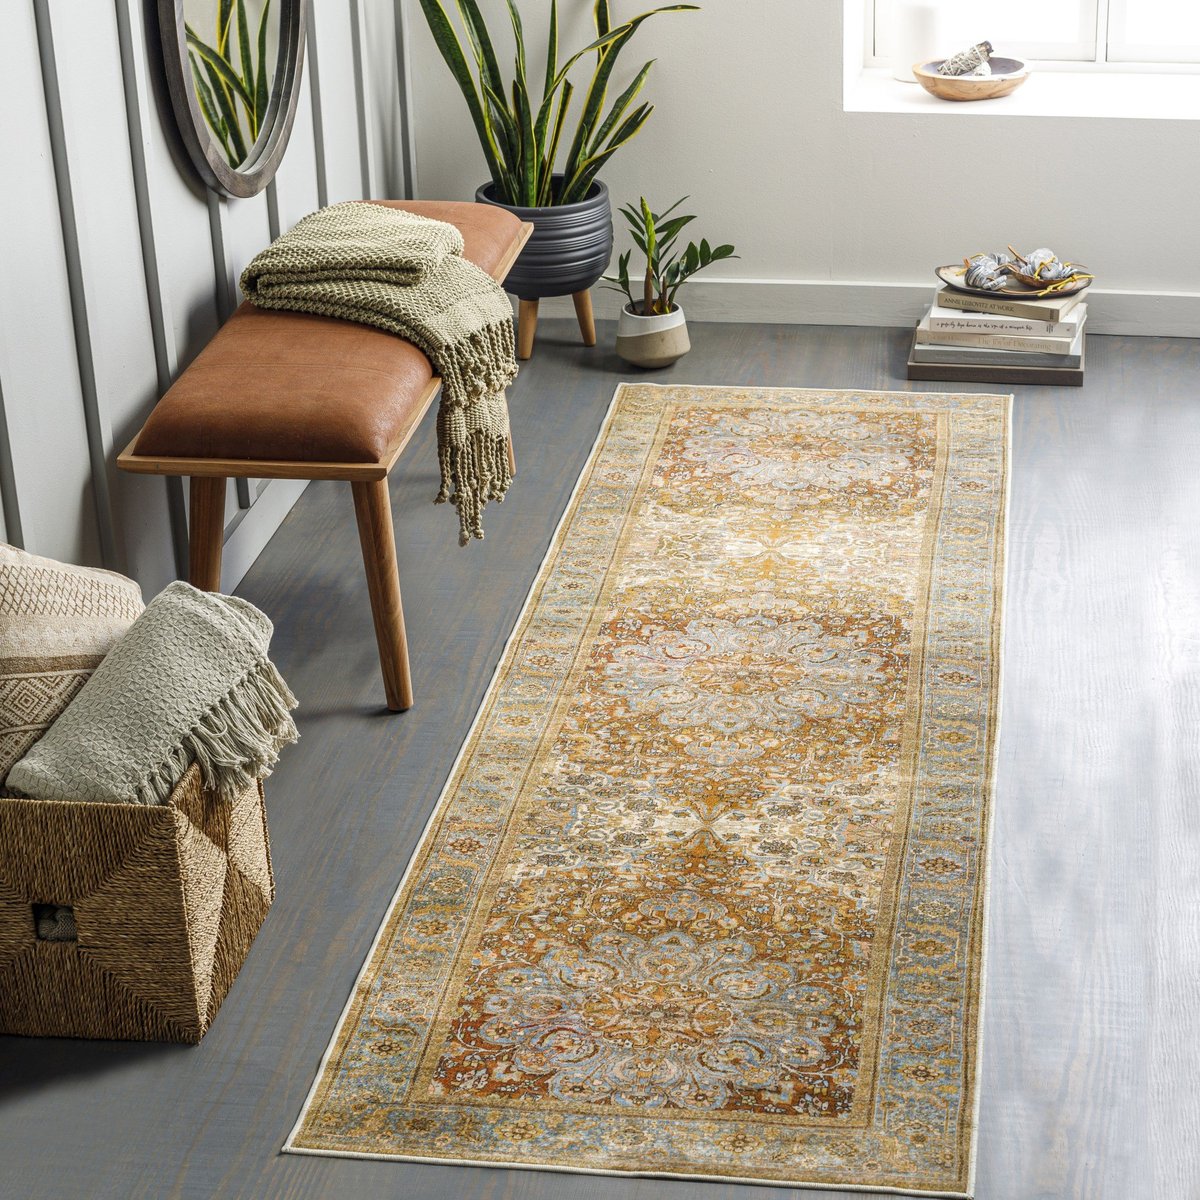 Lavable Printed - Best Dining Room Rugs